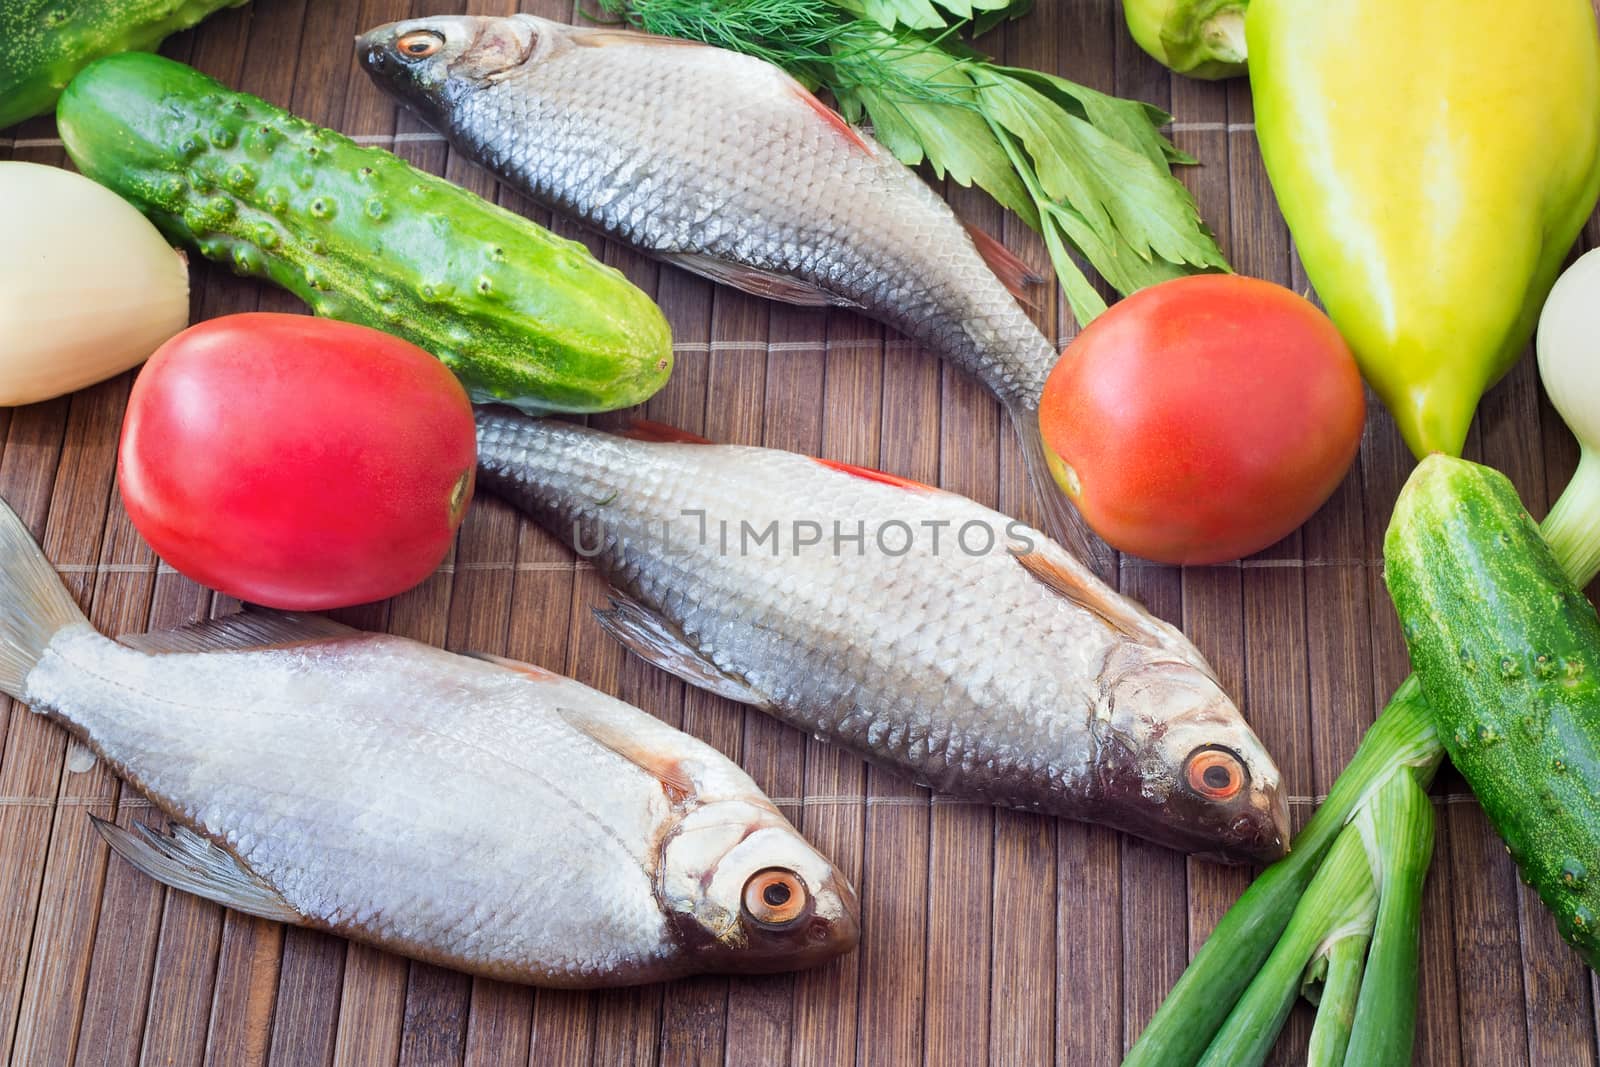 Fish and components for her preparation: vegetables, spices, par by georgina198